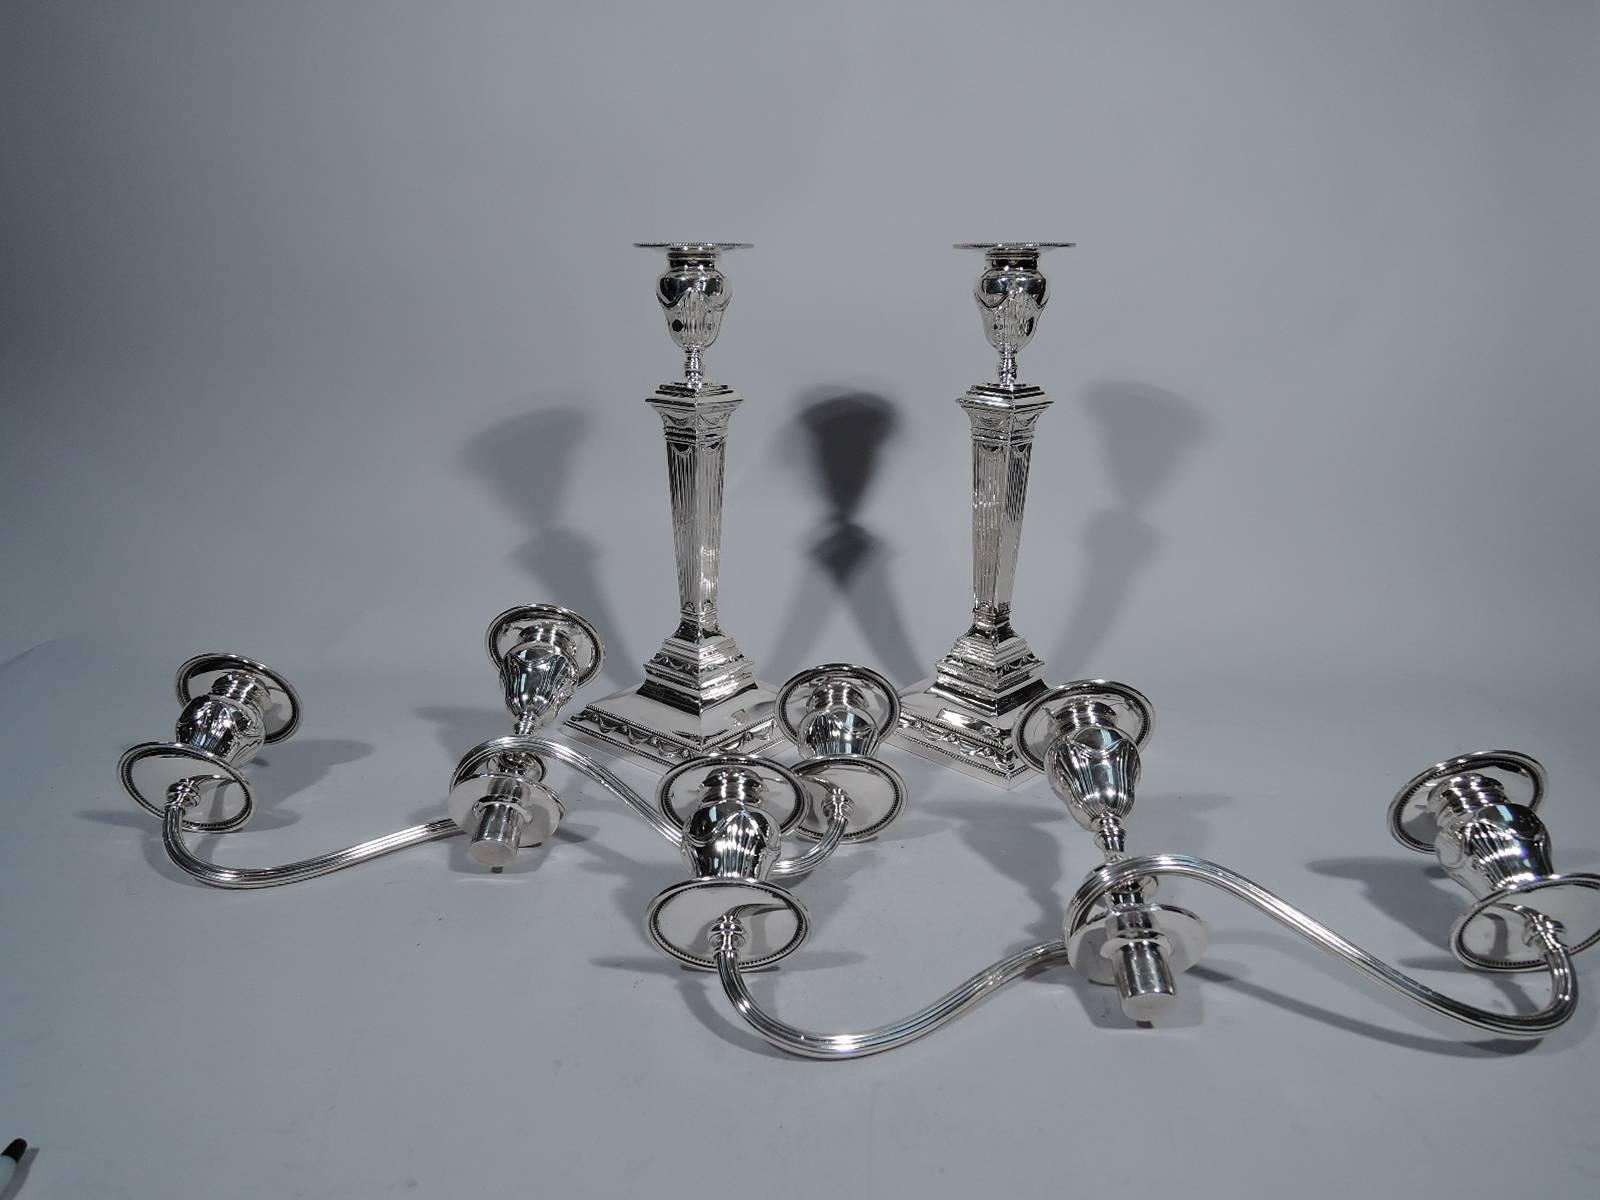 Pair of neoclassical sterling silver candelabra. Made by Tiffany & Co. in New York, circa 1913. Tapering and reeded pillar on stepped square base. Central light with wraparound reeded arms, each terminating in single light. Sockets urn-form with